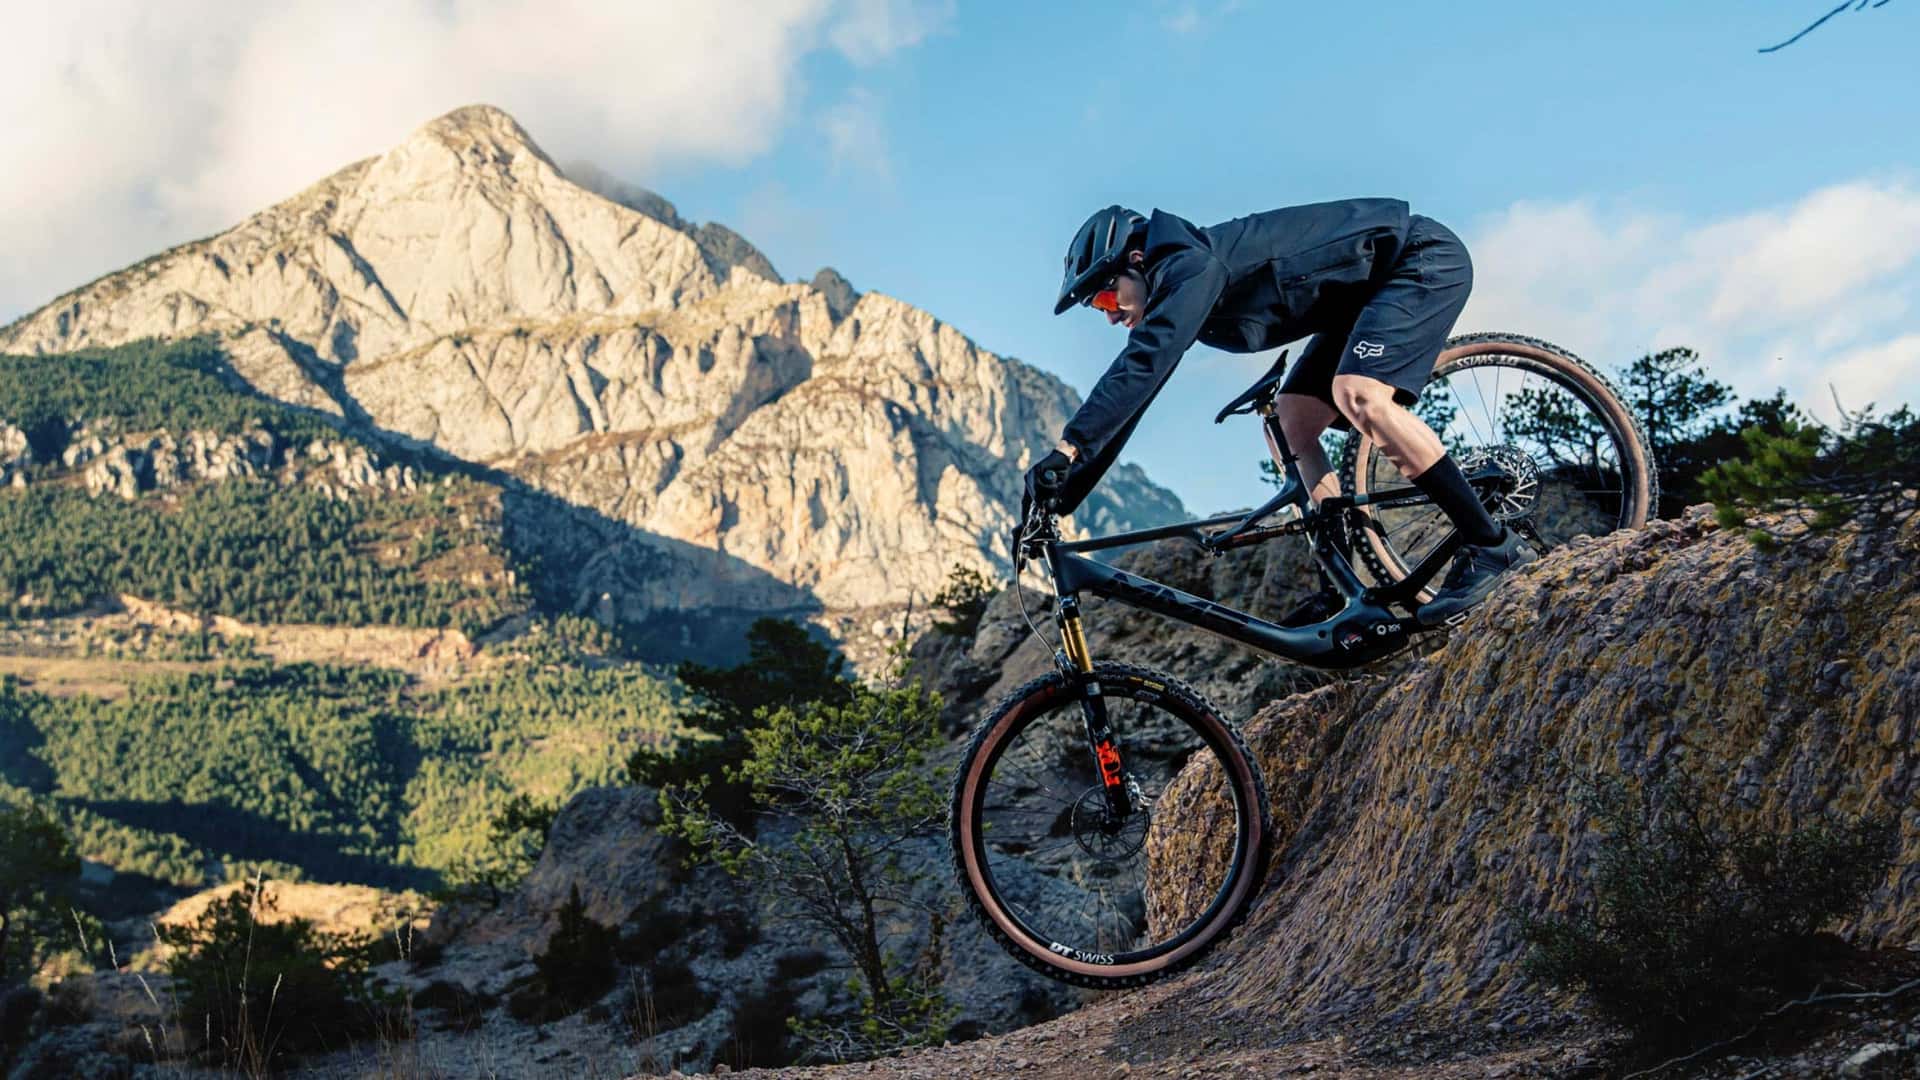 spanish bike brand mmr is ready to hit the trails with new kaizen e mtb jpg